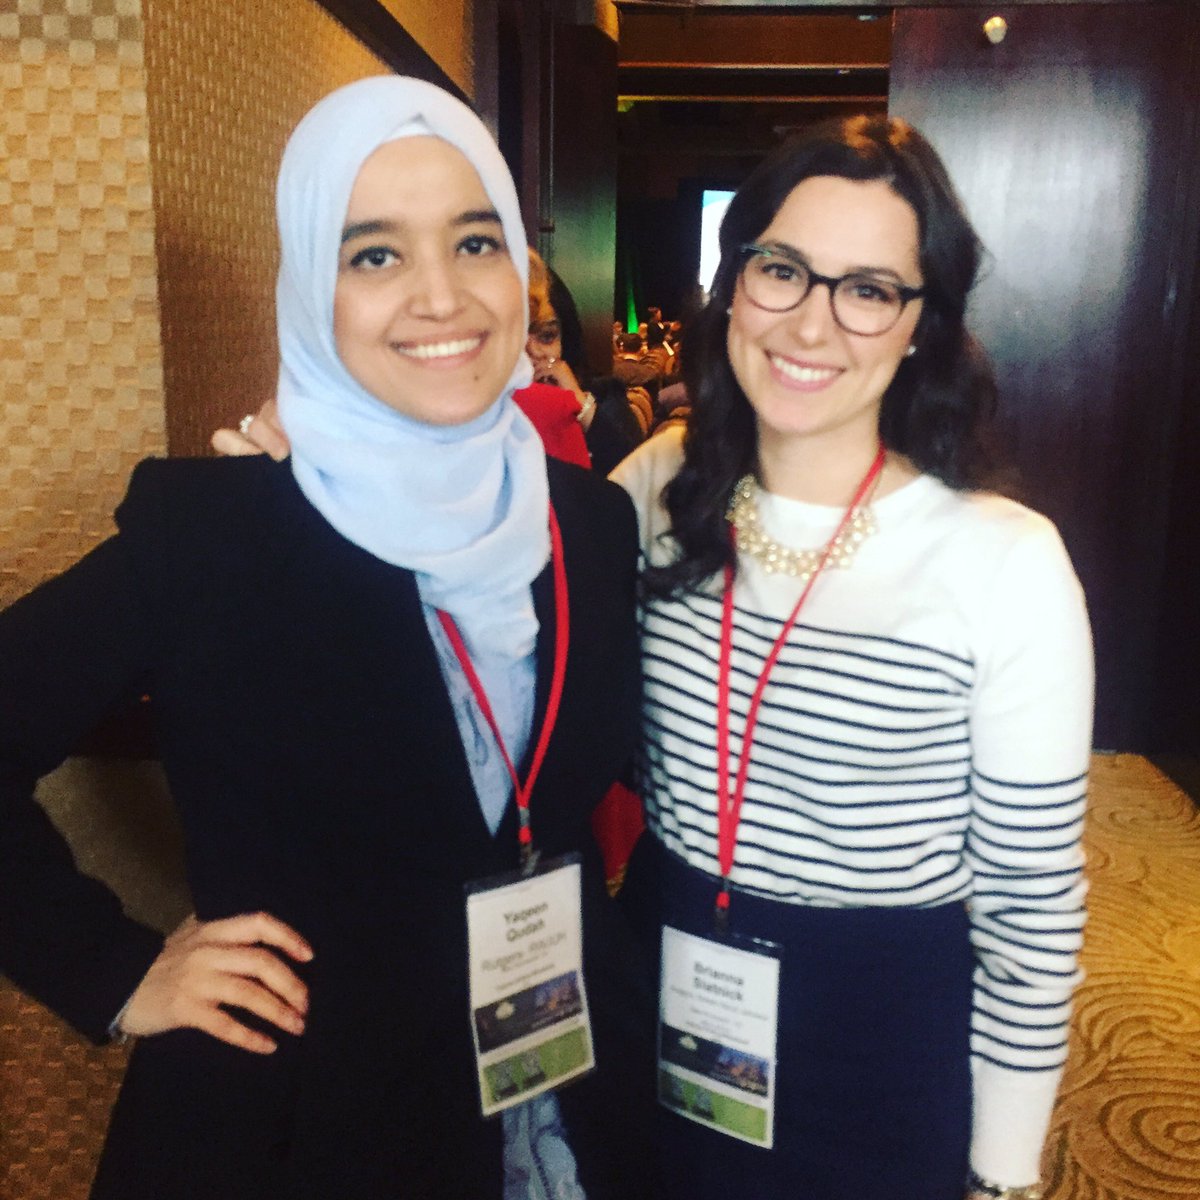 Rutgers at #ASC2019!  Make sure to stop by to see @brie_slatnick present on surgical knots tomorrow afternoon. Great work! @WomenSurgeons @RWJMS @rwjsurgery